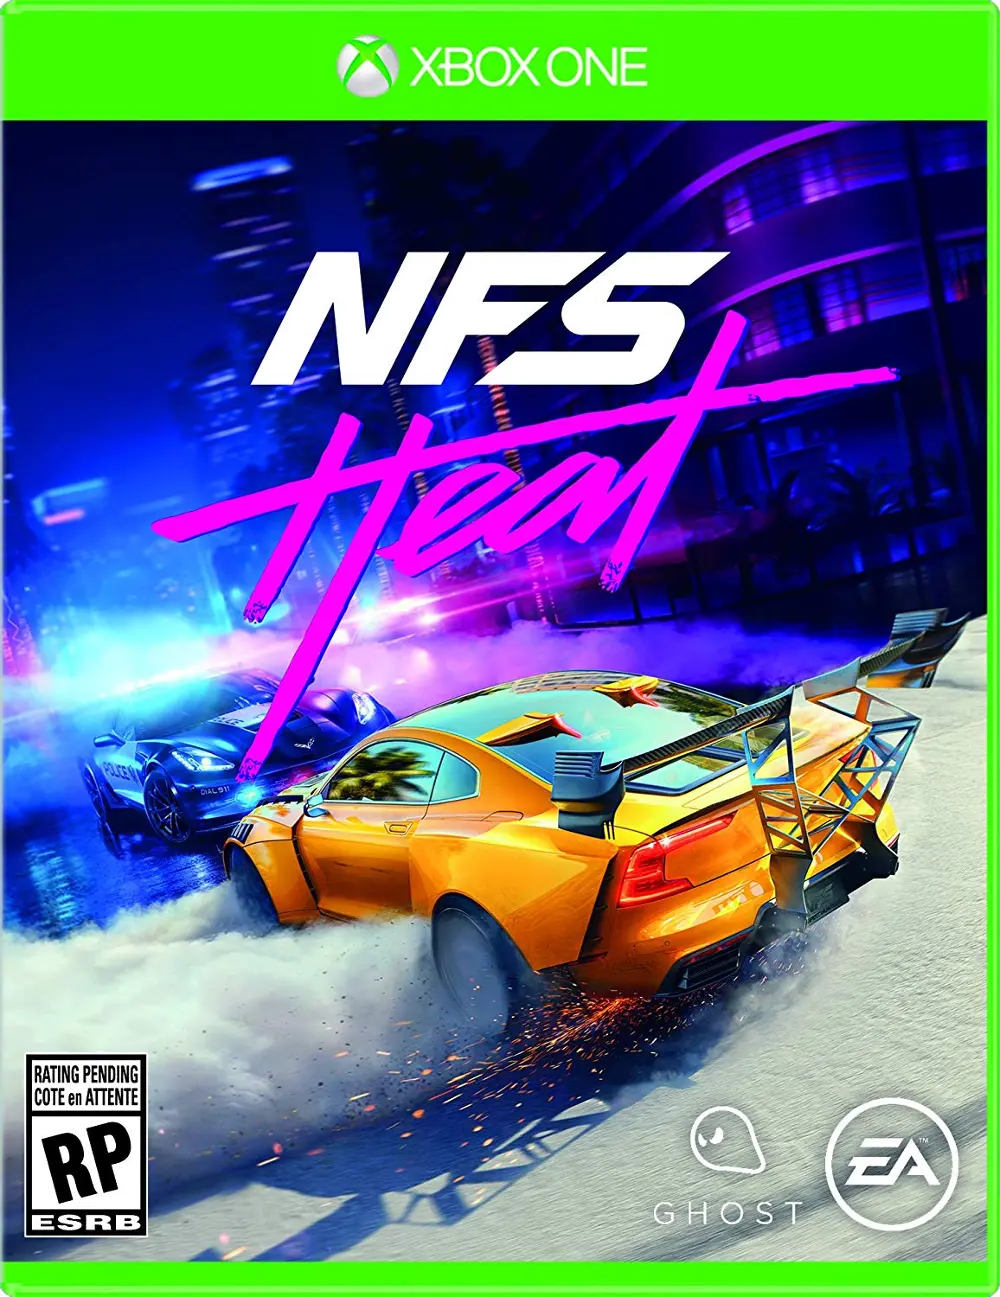 XB1/NEED_FOR_SPEED Need for Speed: Heat - Xbox One-1